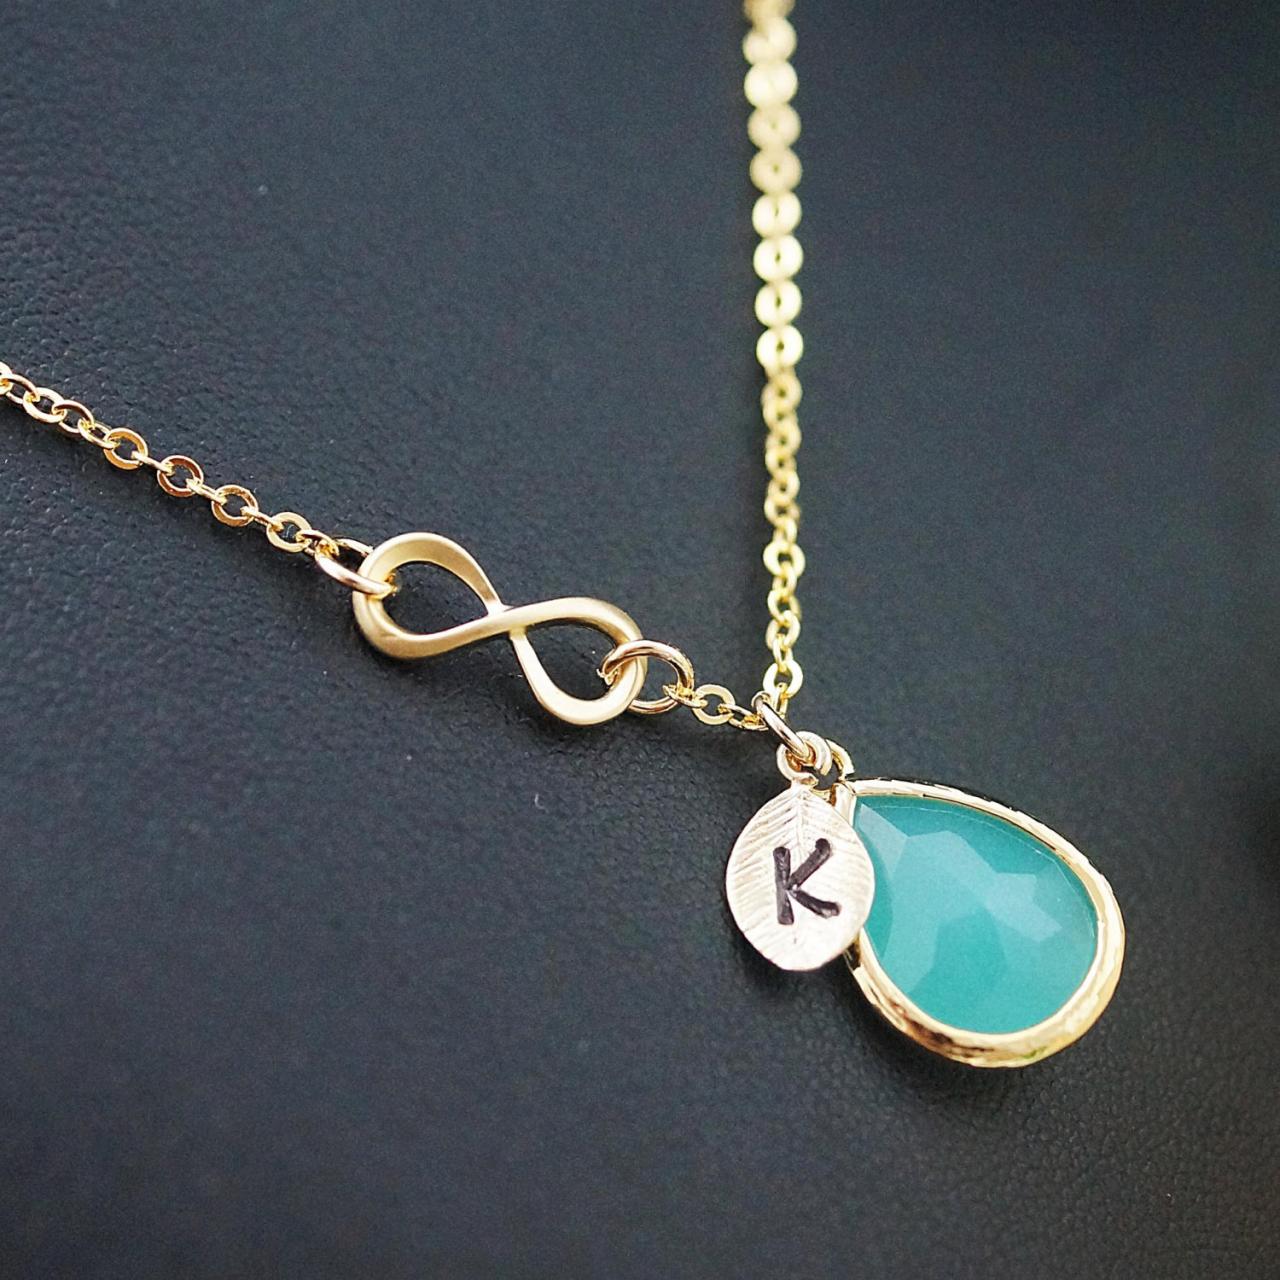 Infinity And Mint Glass Necklace Infinity Personalized Necklace Initial Necklace Monogram Christmas Gift Bridesmaid Gift Wedding Jewelry